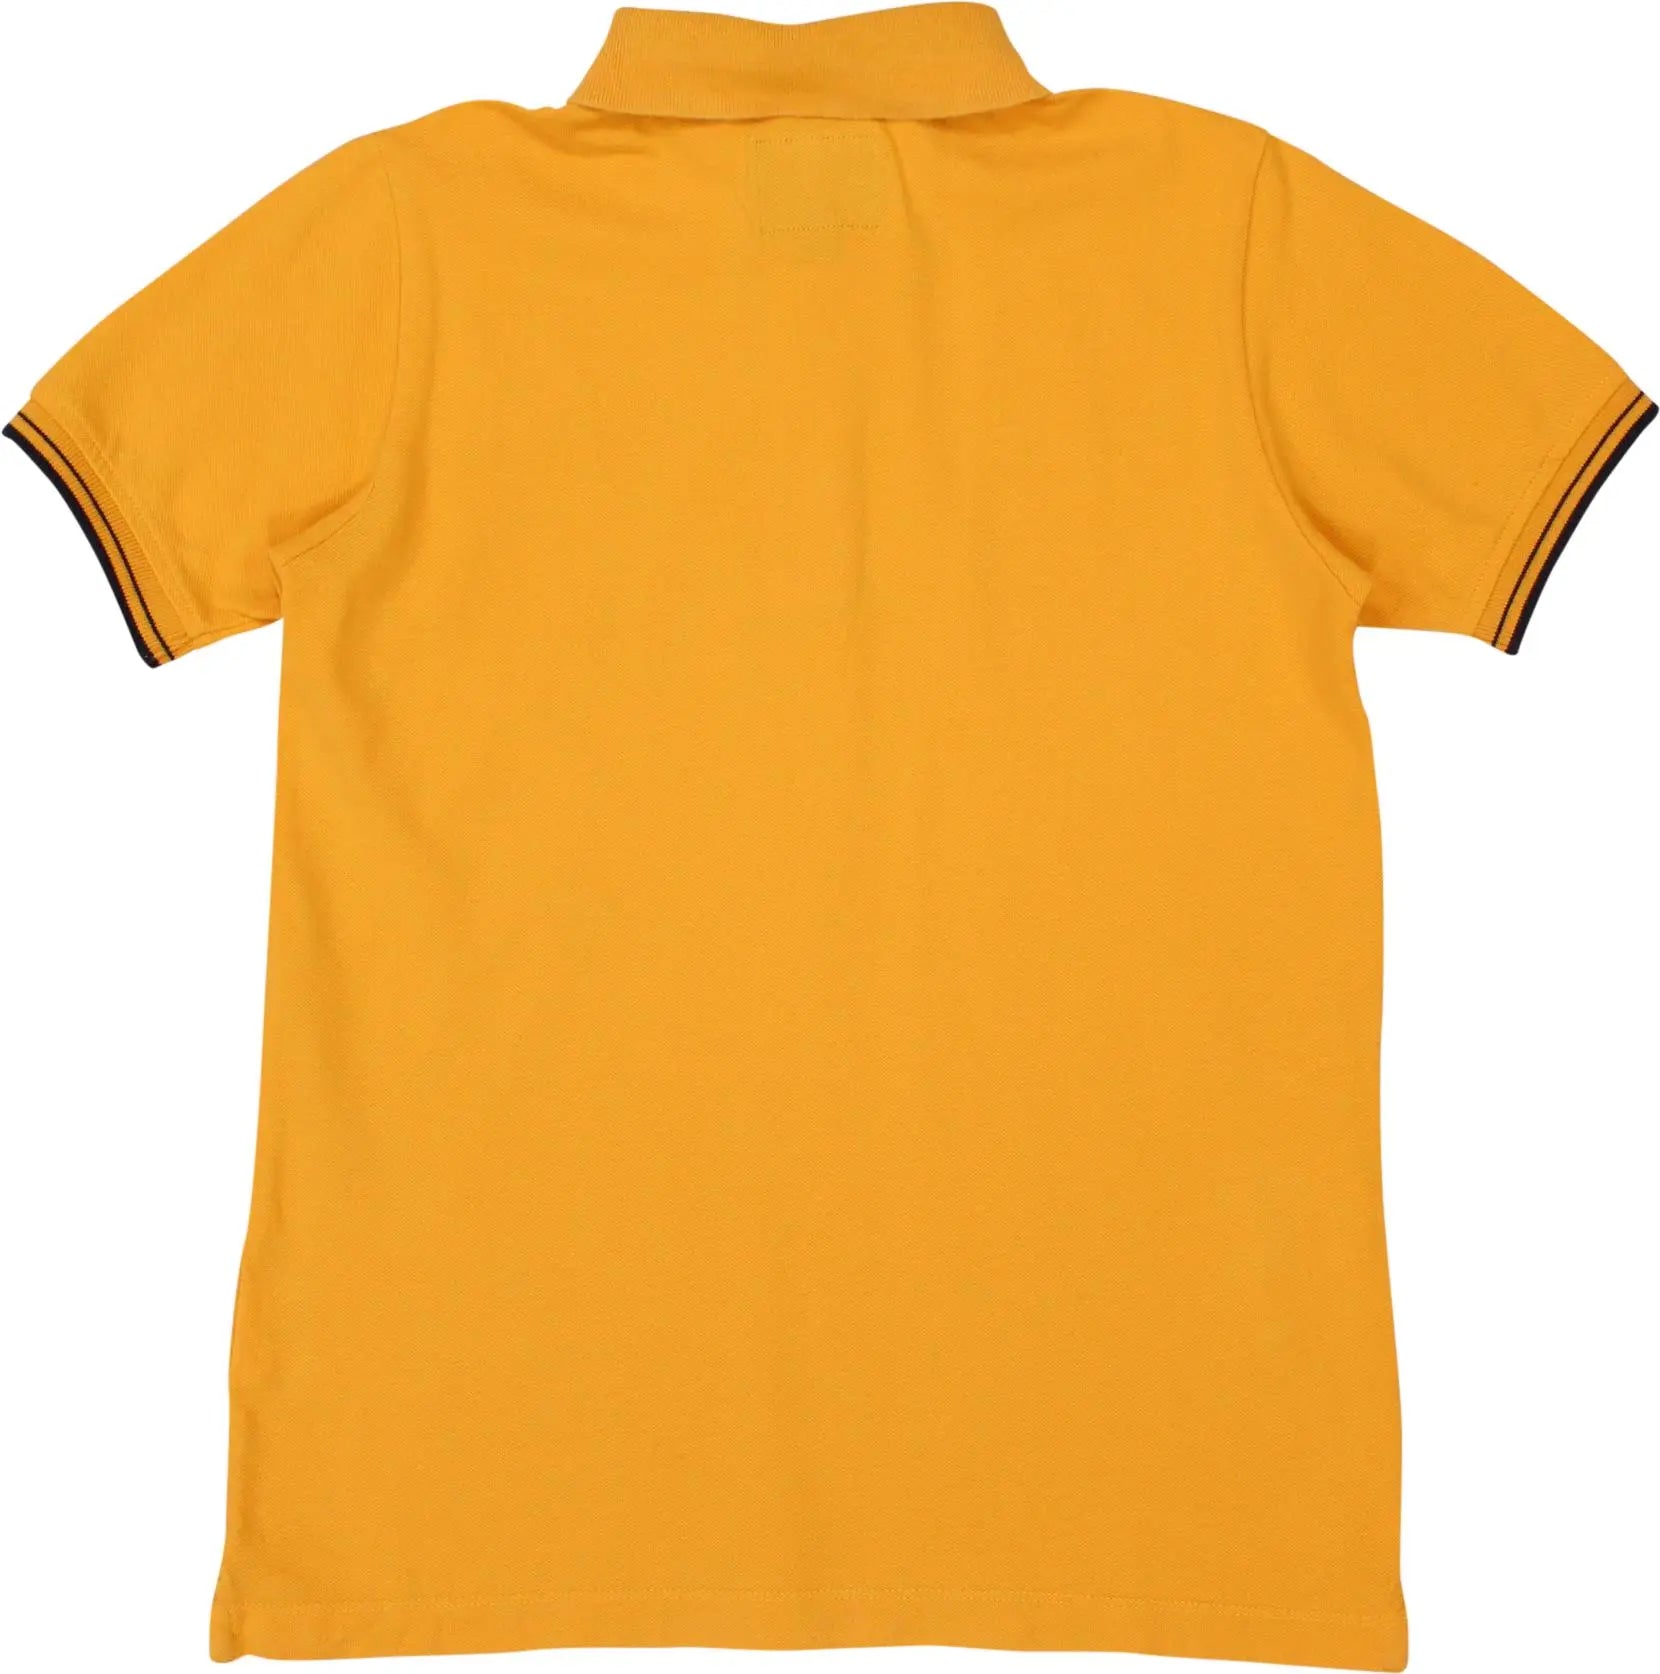 Woolrich - Yellow Polo Shirt by Woolrich- ThriftTale.com - Vintage and second handclothing